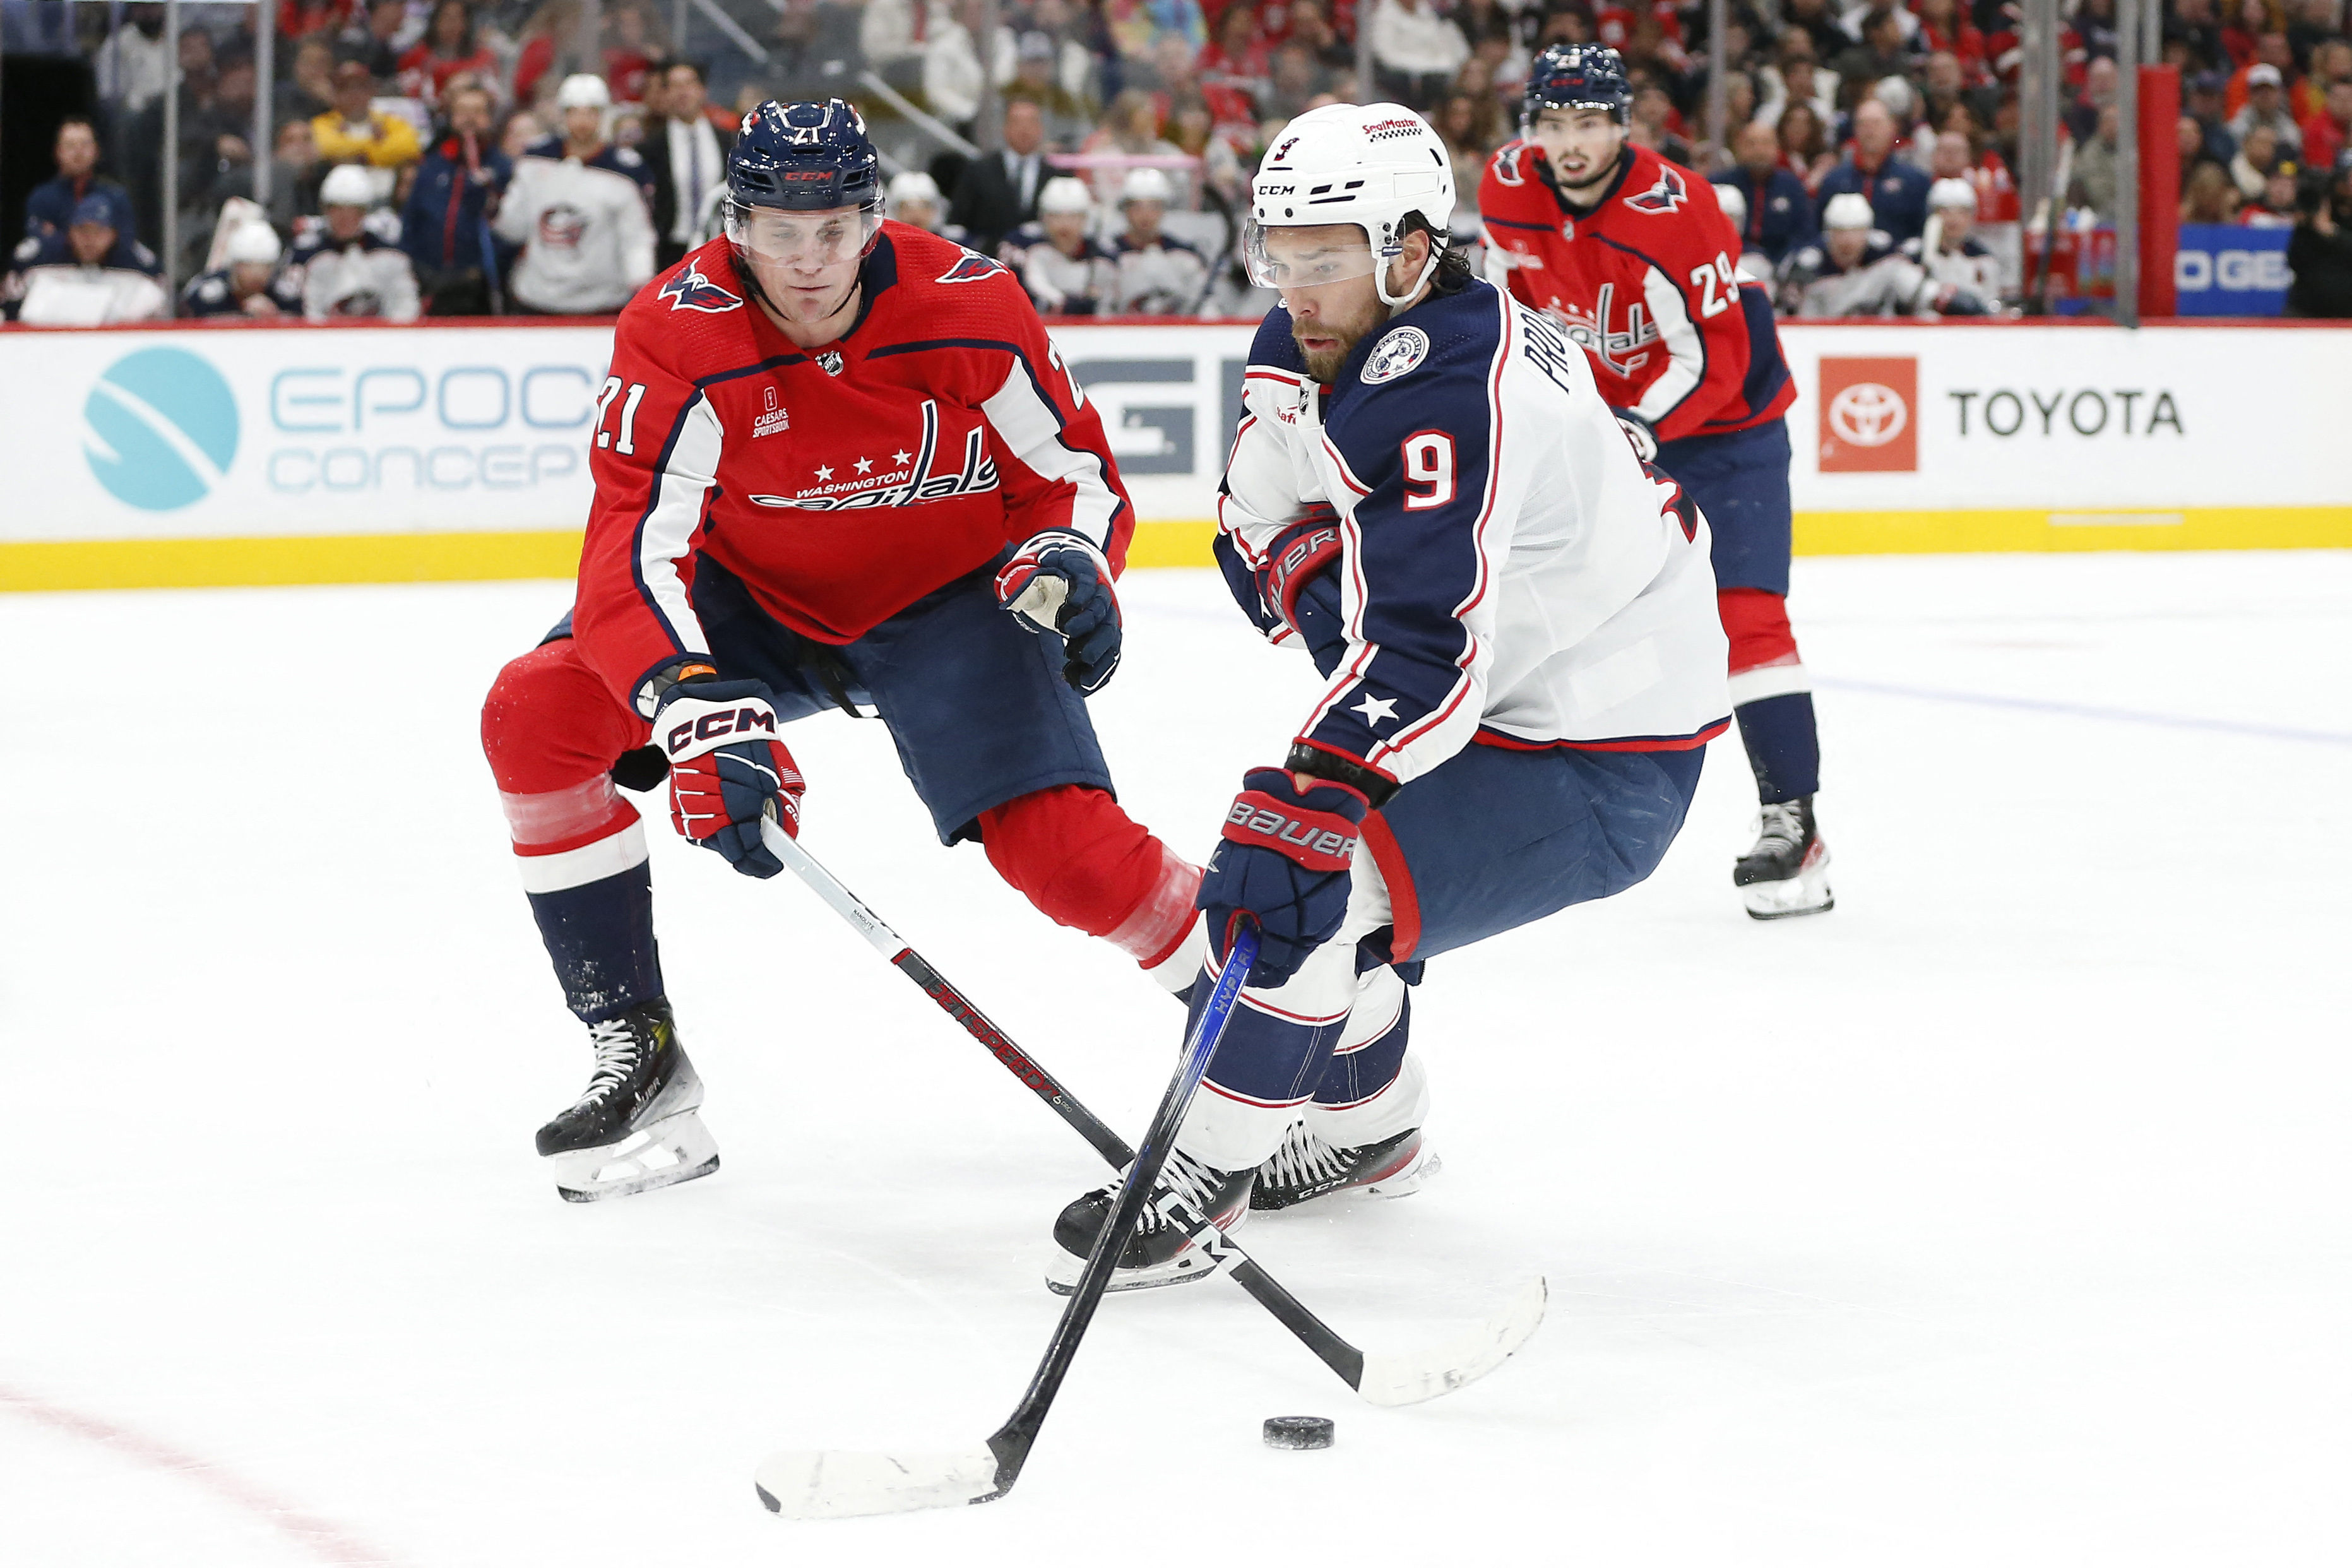 Capitals outlast Blue Jackets 4-3, earn fourth straight win | Reuters